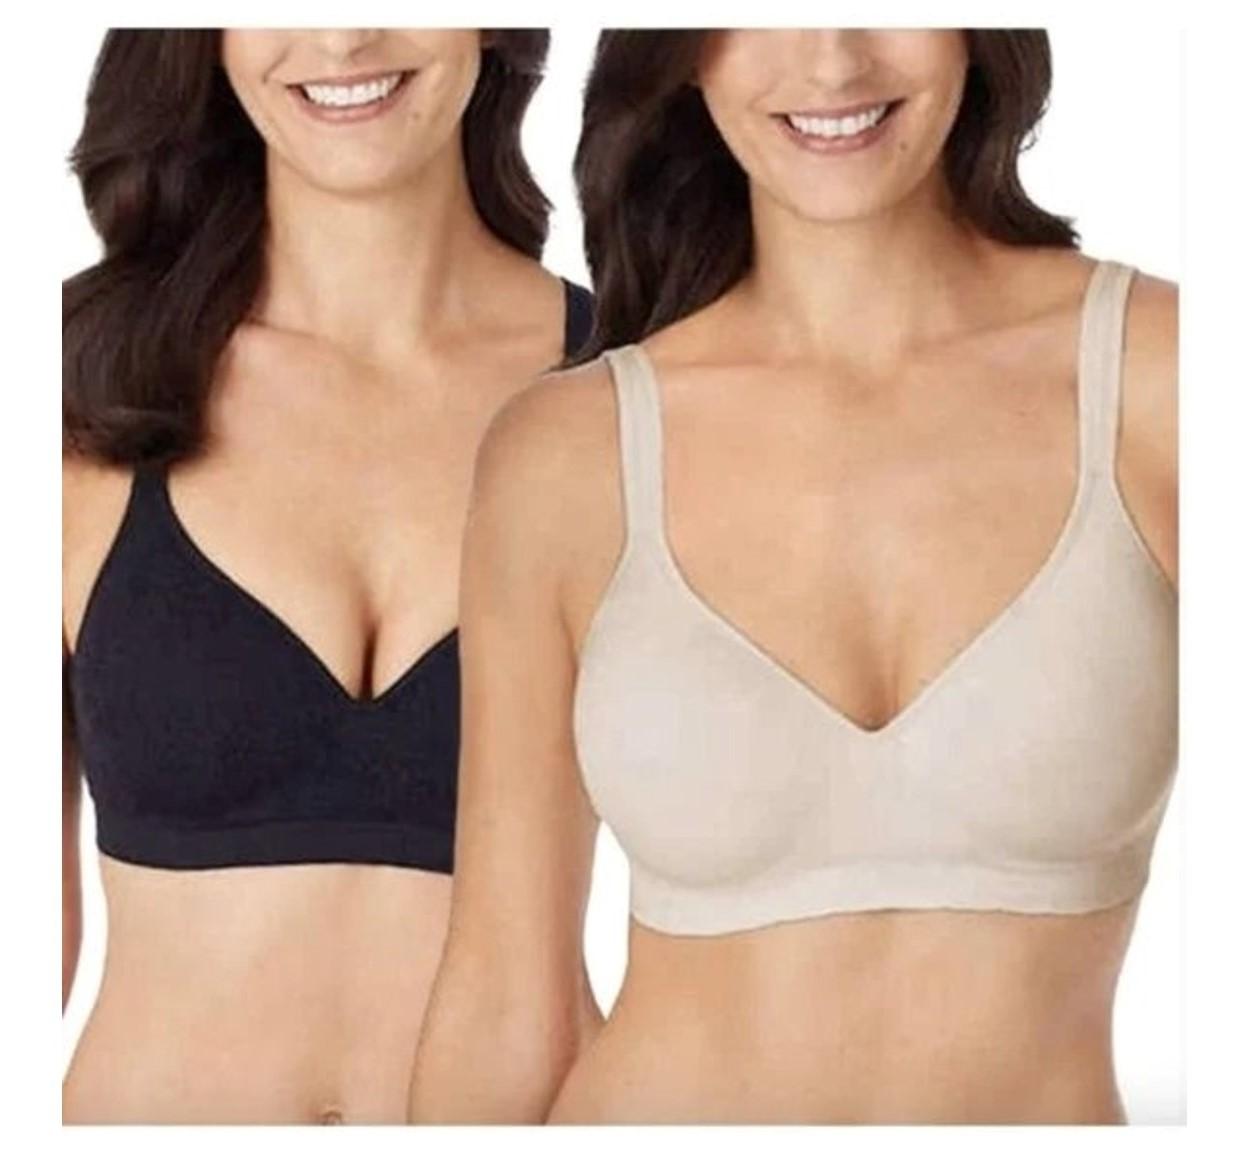 CAROLE HOCHMAN Seamless Comfort Bra Wire Free Molded Cups Comfort Straps (2  Pack) : : Clothing, Shoes & Accessories